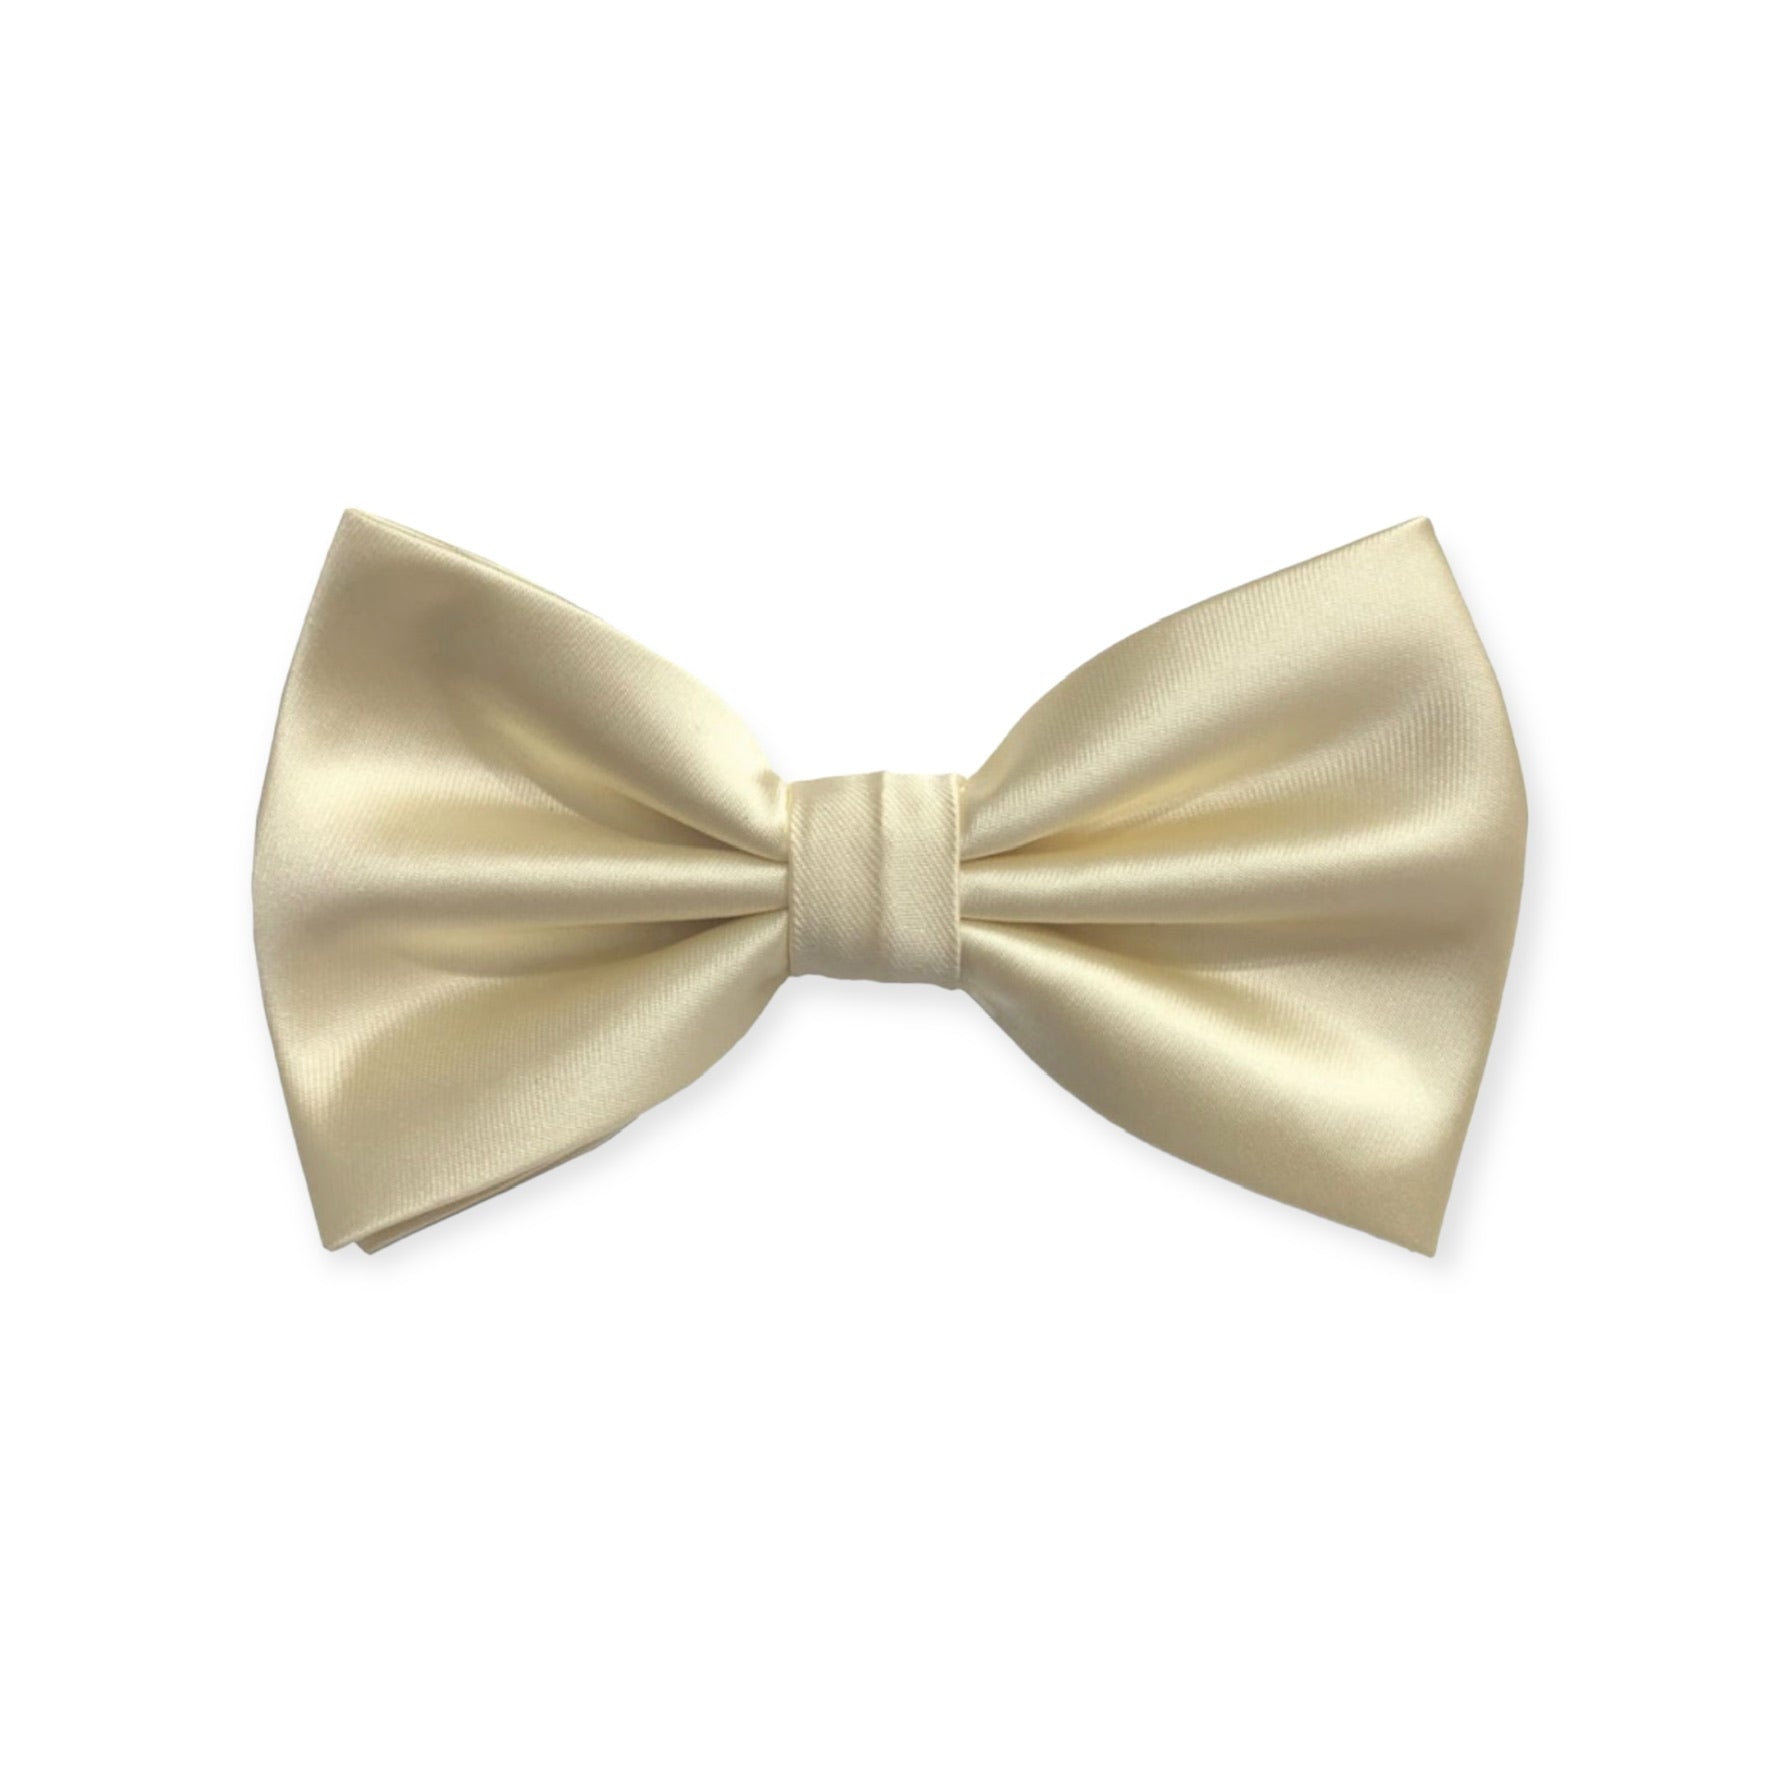 Solid Champagne Bow Tie and Hanky